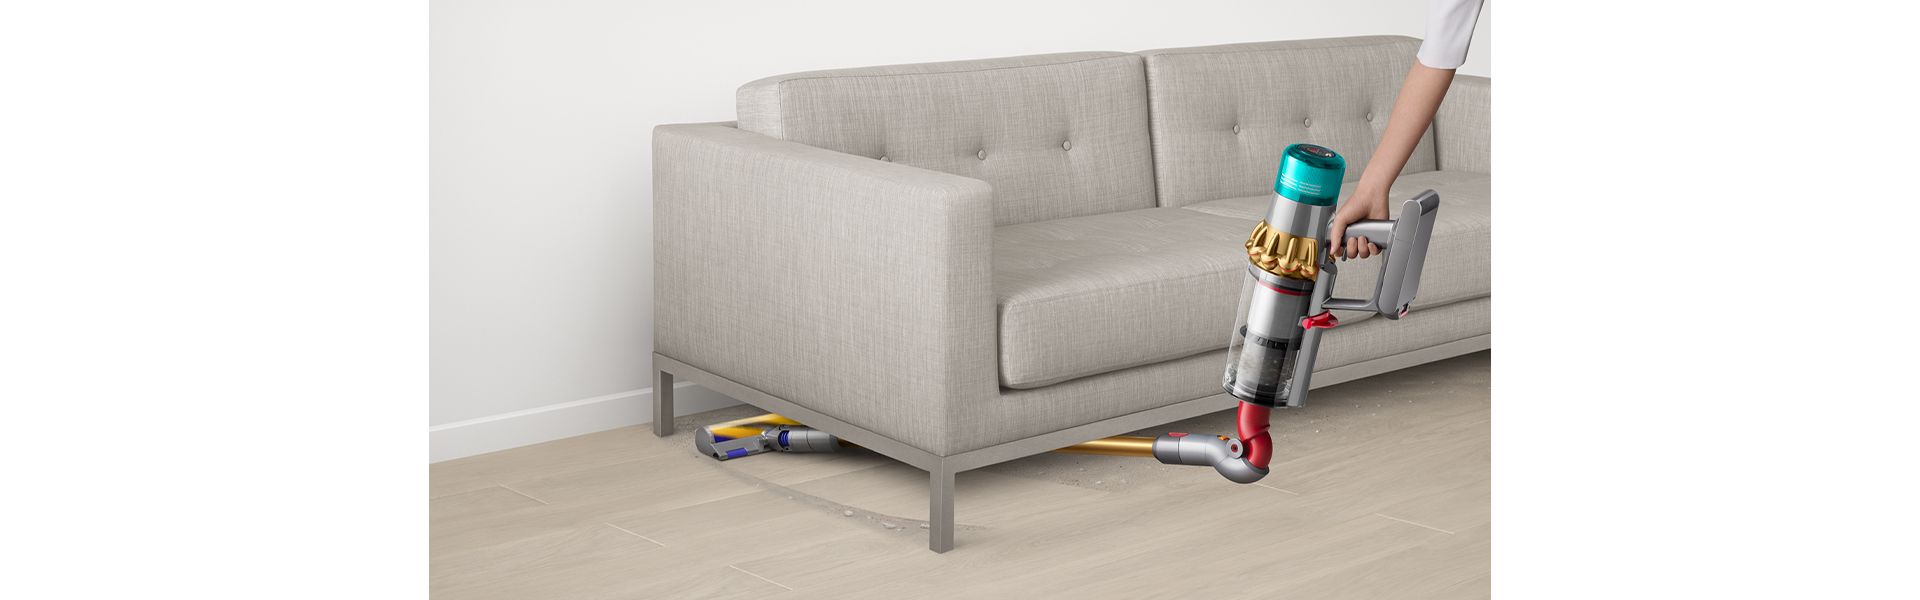 Dyson low reach adaptor cleaning under a couch